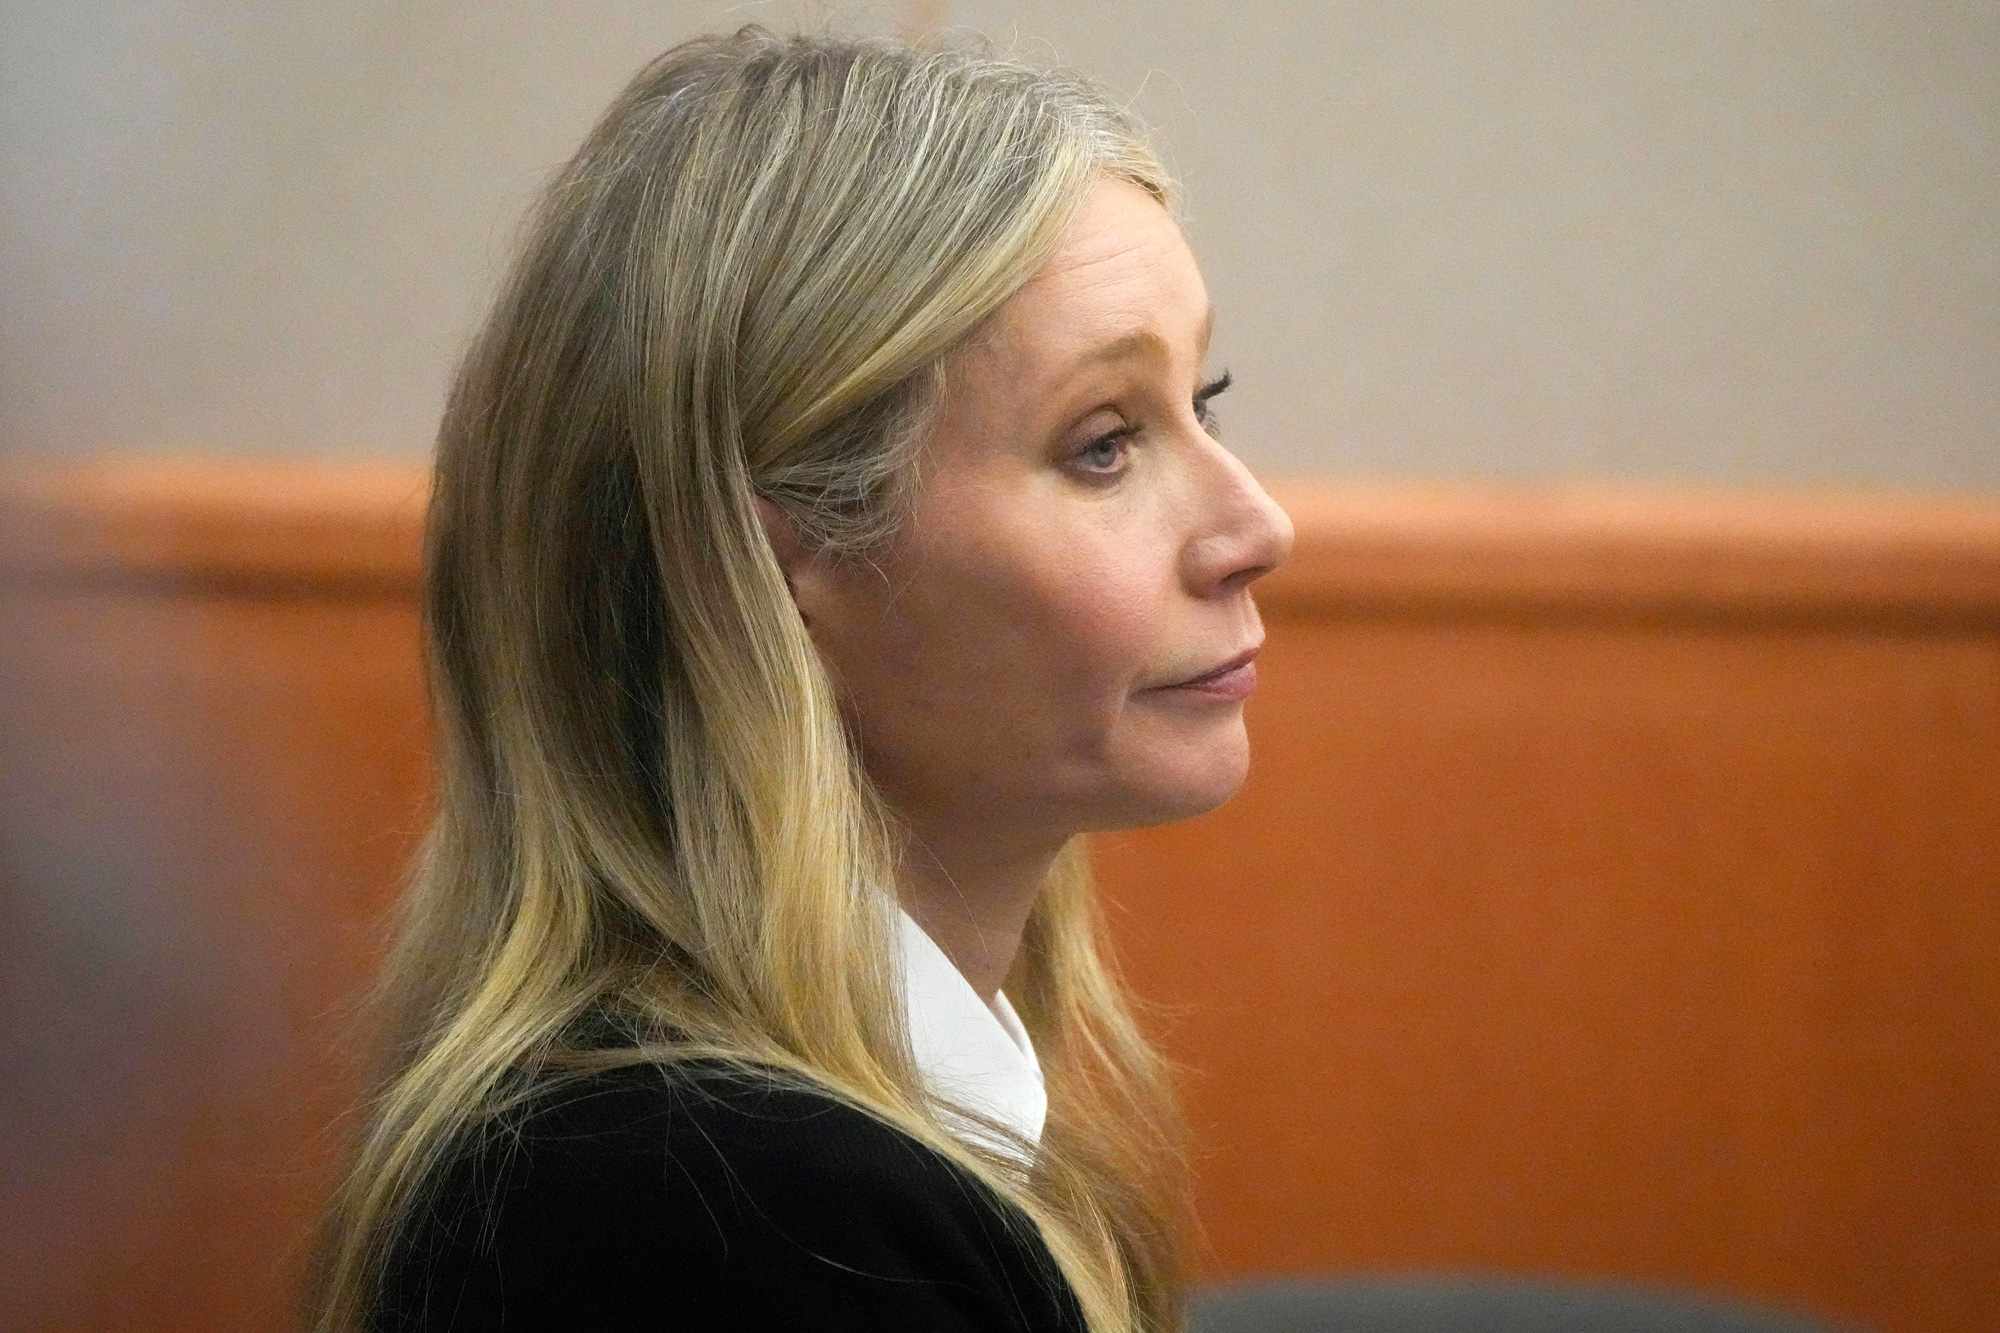 Gwyneth Paltrow sits in court during an objection by her attorney during her trial, in Park City, Utah. Paltrow is accused in a lawsuit of crashing into a skier during a 2016 family ski vacation, leaving him with brain damage and four broken ribs Gwyneth Paltrow Skiing Lawsuit, Park City, United States - 27 Mar 2023